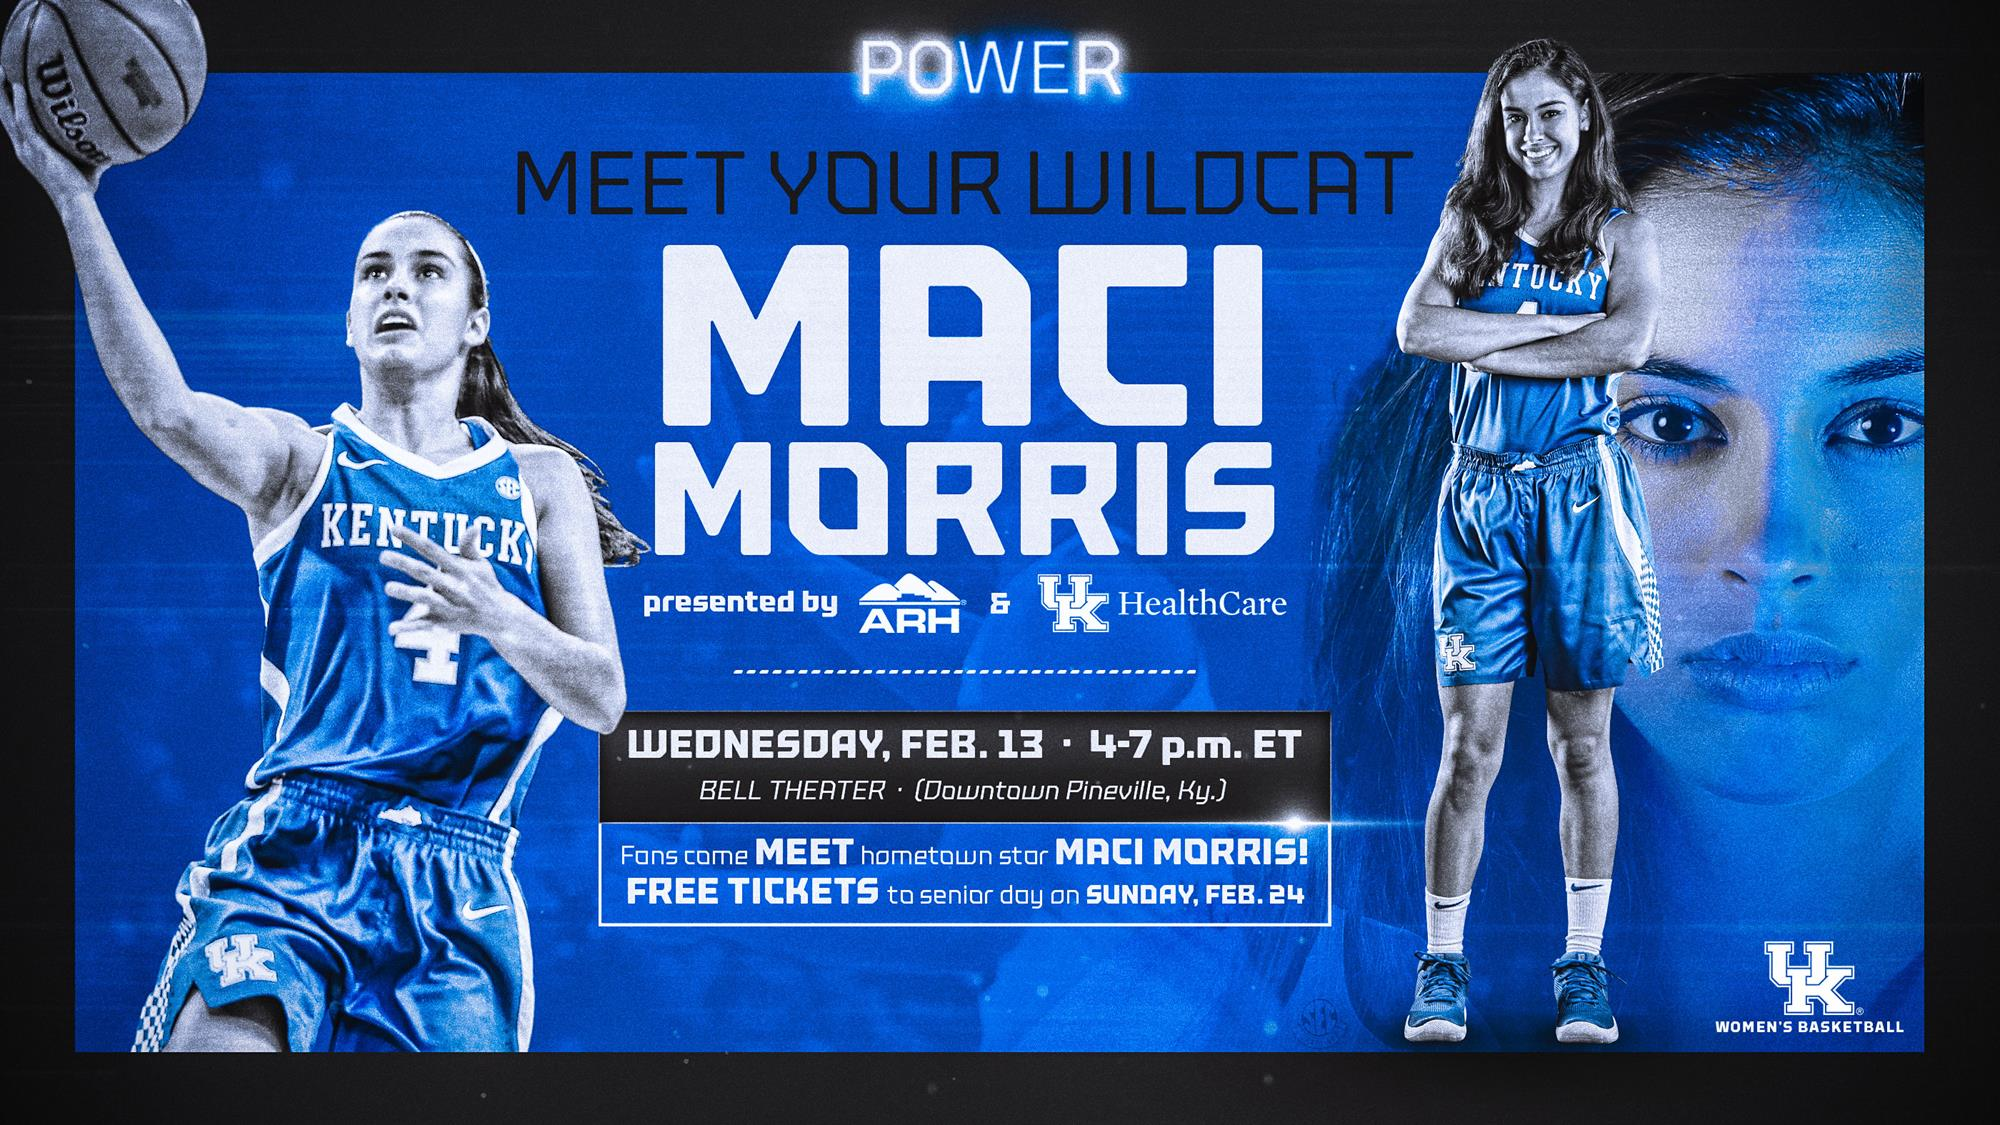 Meet Your Wildcat Featuring Maci Morris Presented by ARH and UK Healthcare Set for Feb. 13 at Bell Theater in Pineville